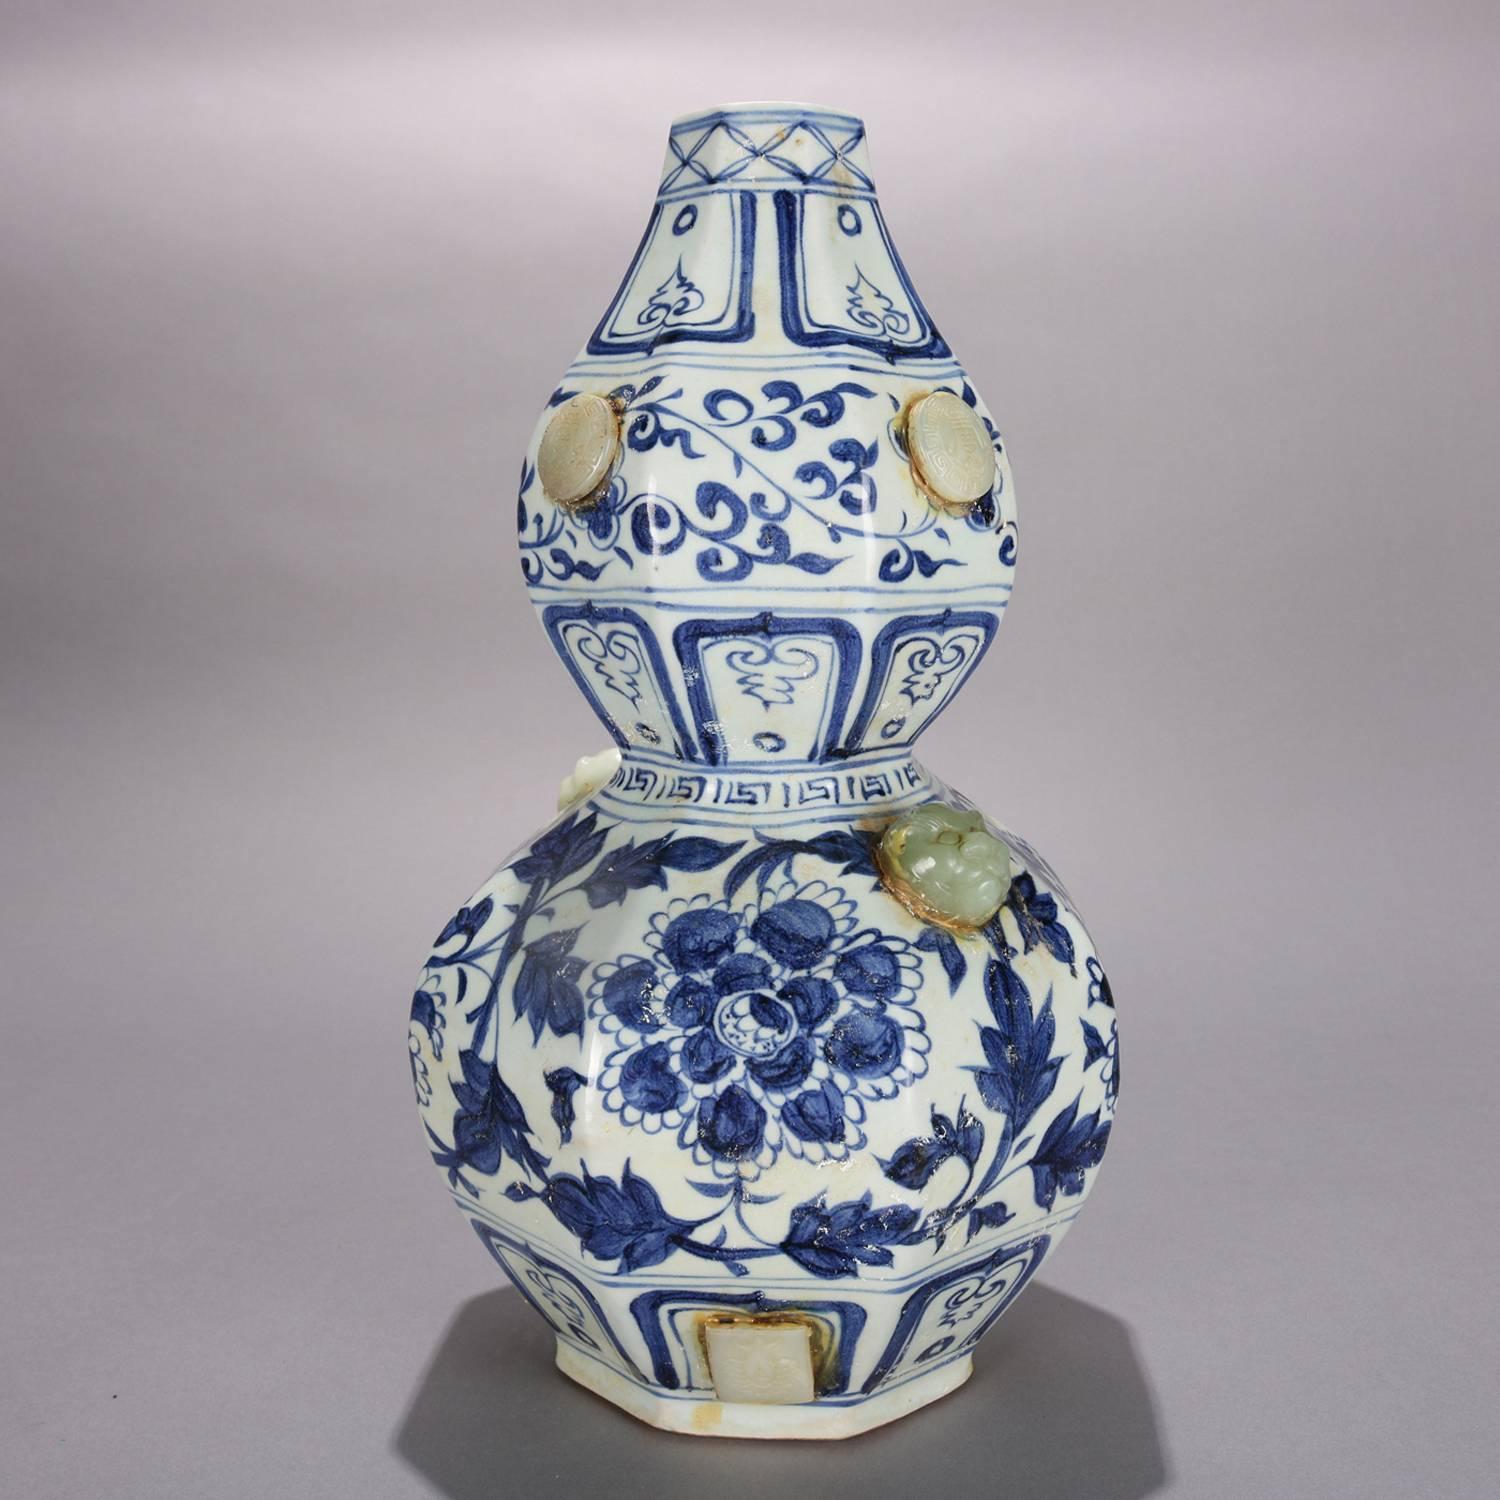 Chinese art pottery vase features gourd form with blue and white glazed foliate and floral decoration and applied jade carvings including masks, 20th century

Measures: 15